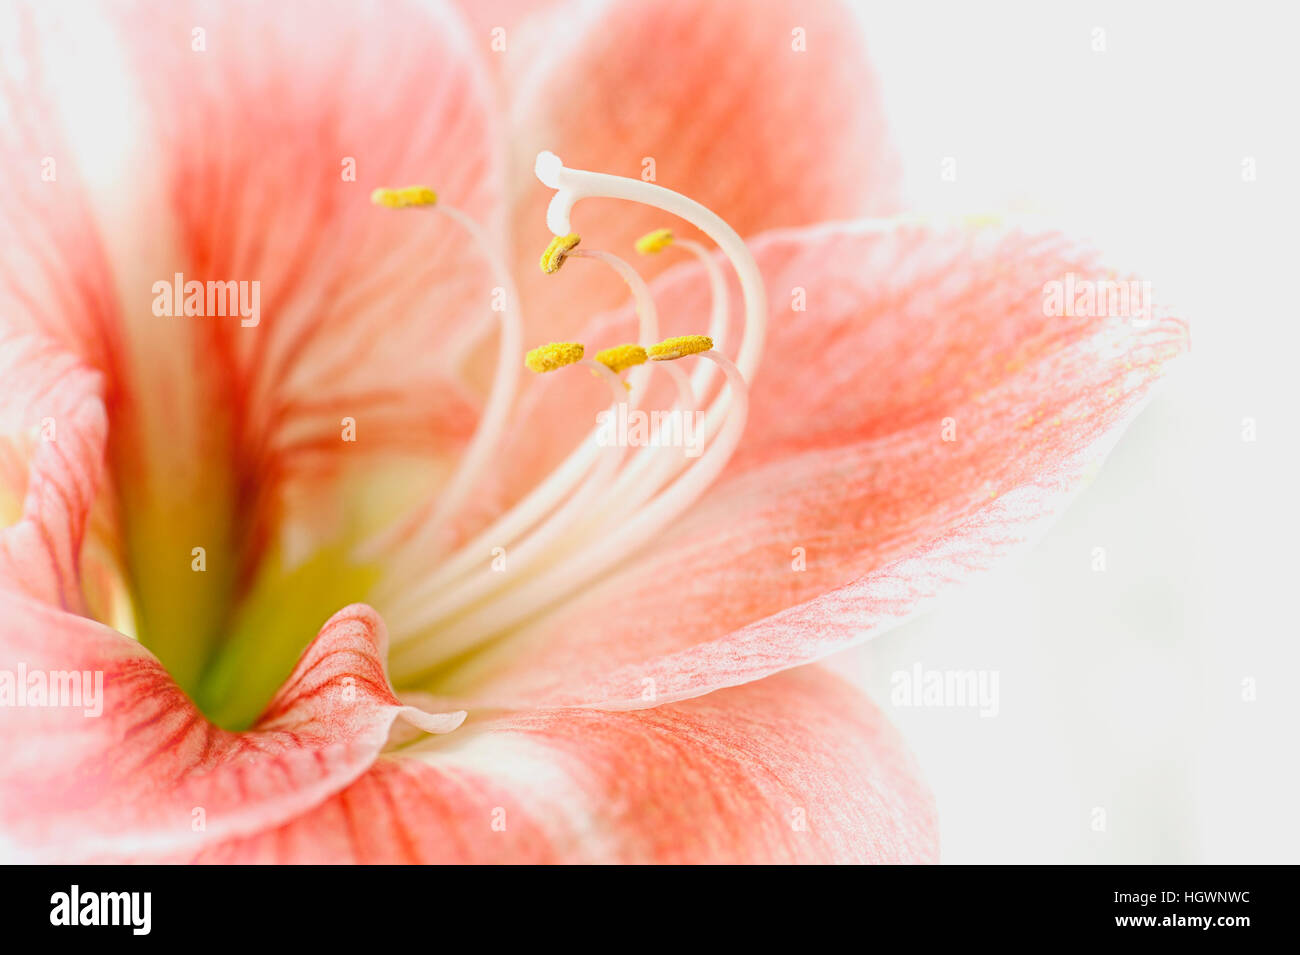 Close-up macro image of the beautiful Hippeastrum flower commonly known as the Amaryllis lily flower. Stock Photo